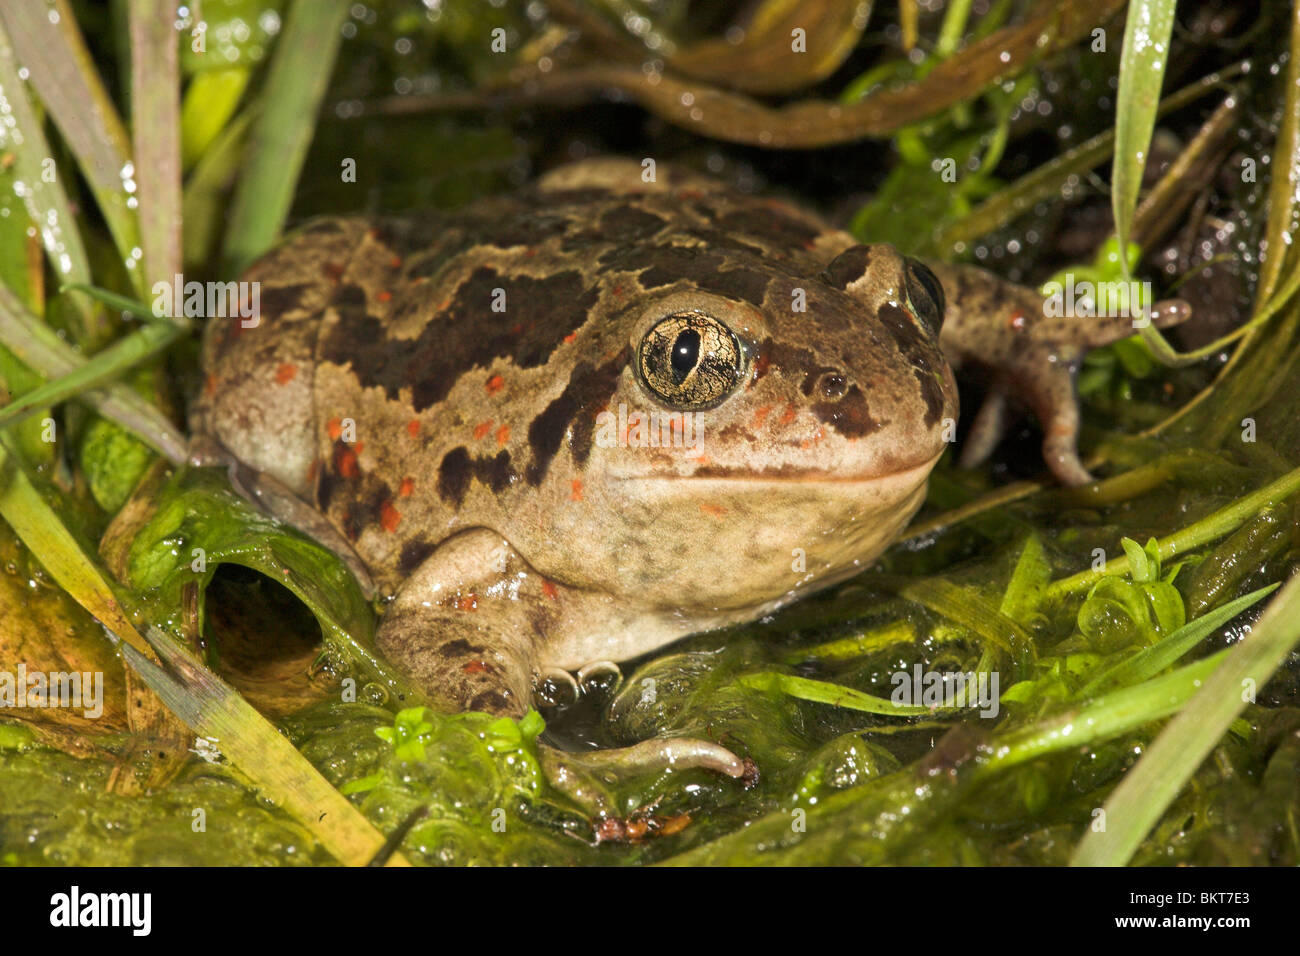 photo of a male common spadefoot in the water between algae Stock Photo